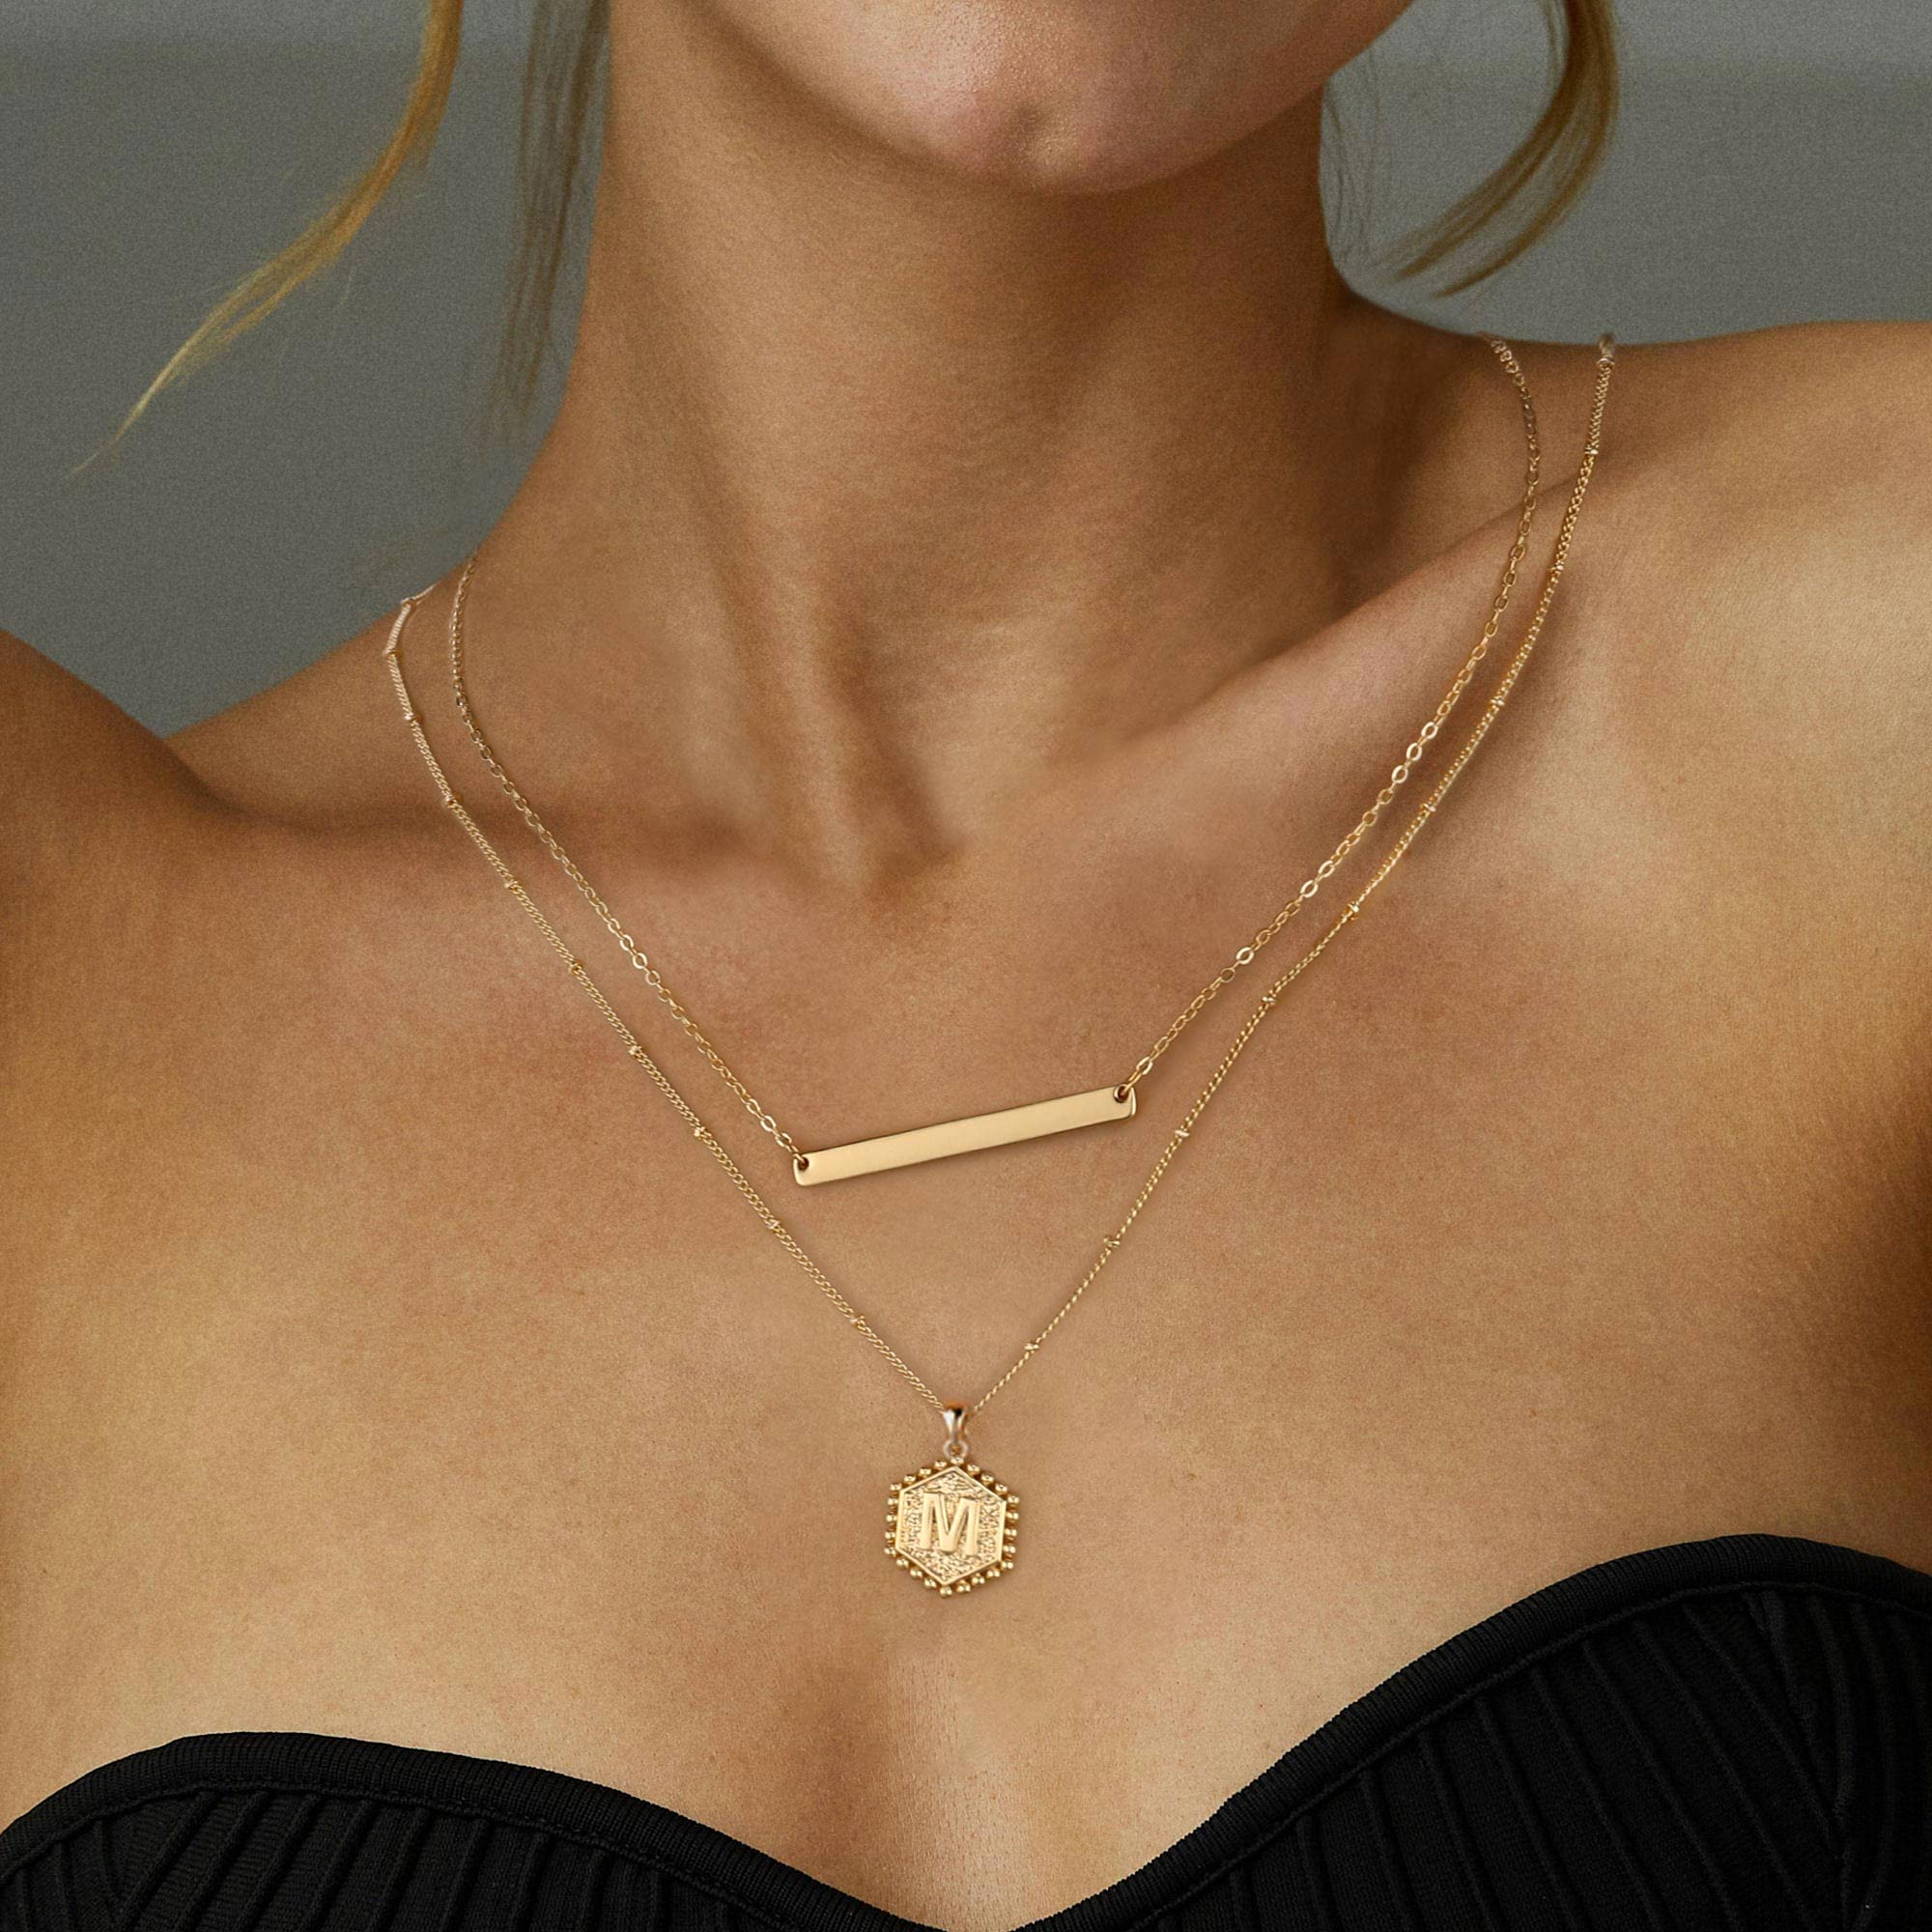 Turandoss Gold Layered Initial Necklaces for Women, 14K Gold Plated Bar Necklace Handmade Layering Hexagon Letter Pendant Beads Chain Necklace Layered Necklaces for Women Gold Jewelry Gifts